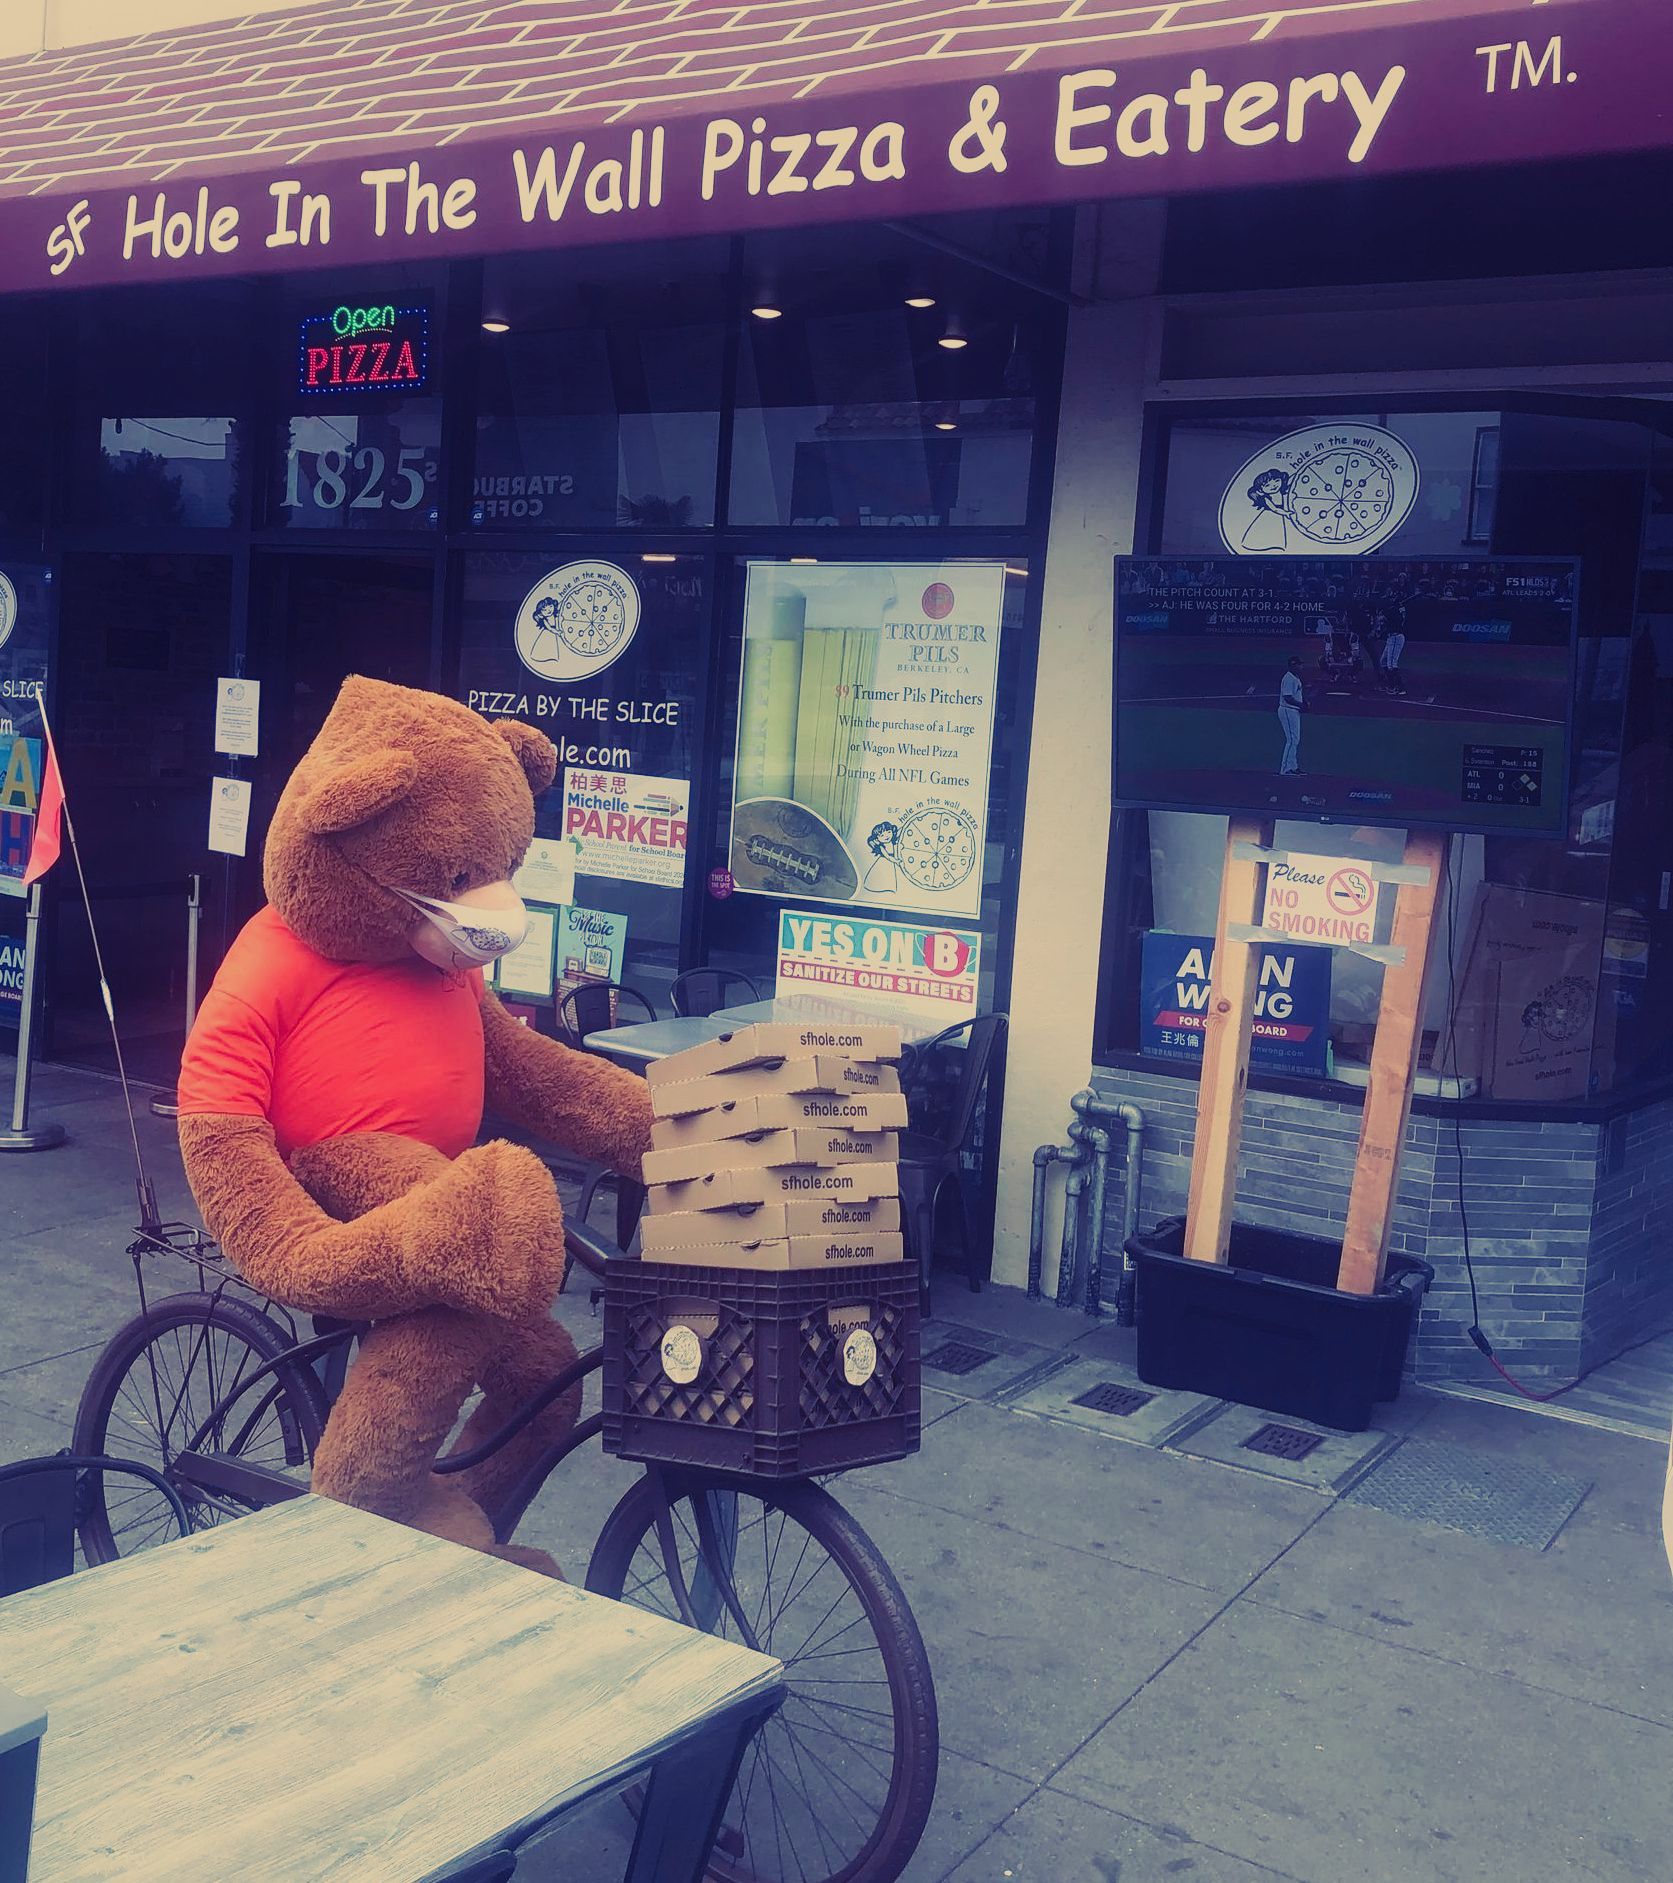 A teddy bear is riding a bike in front of a hole in the wall pizza and eatery